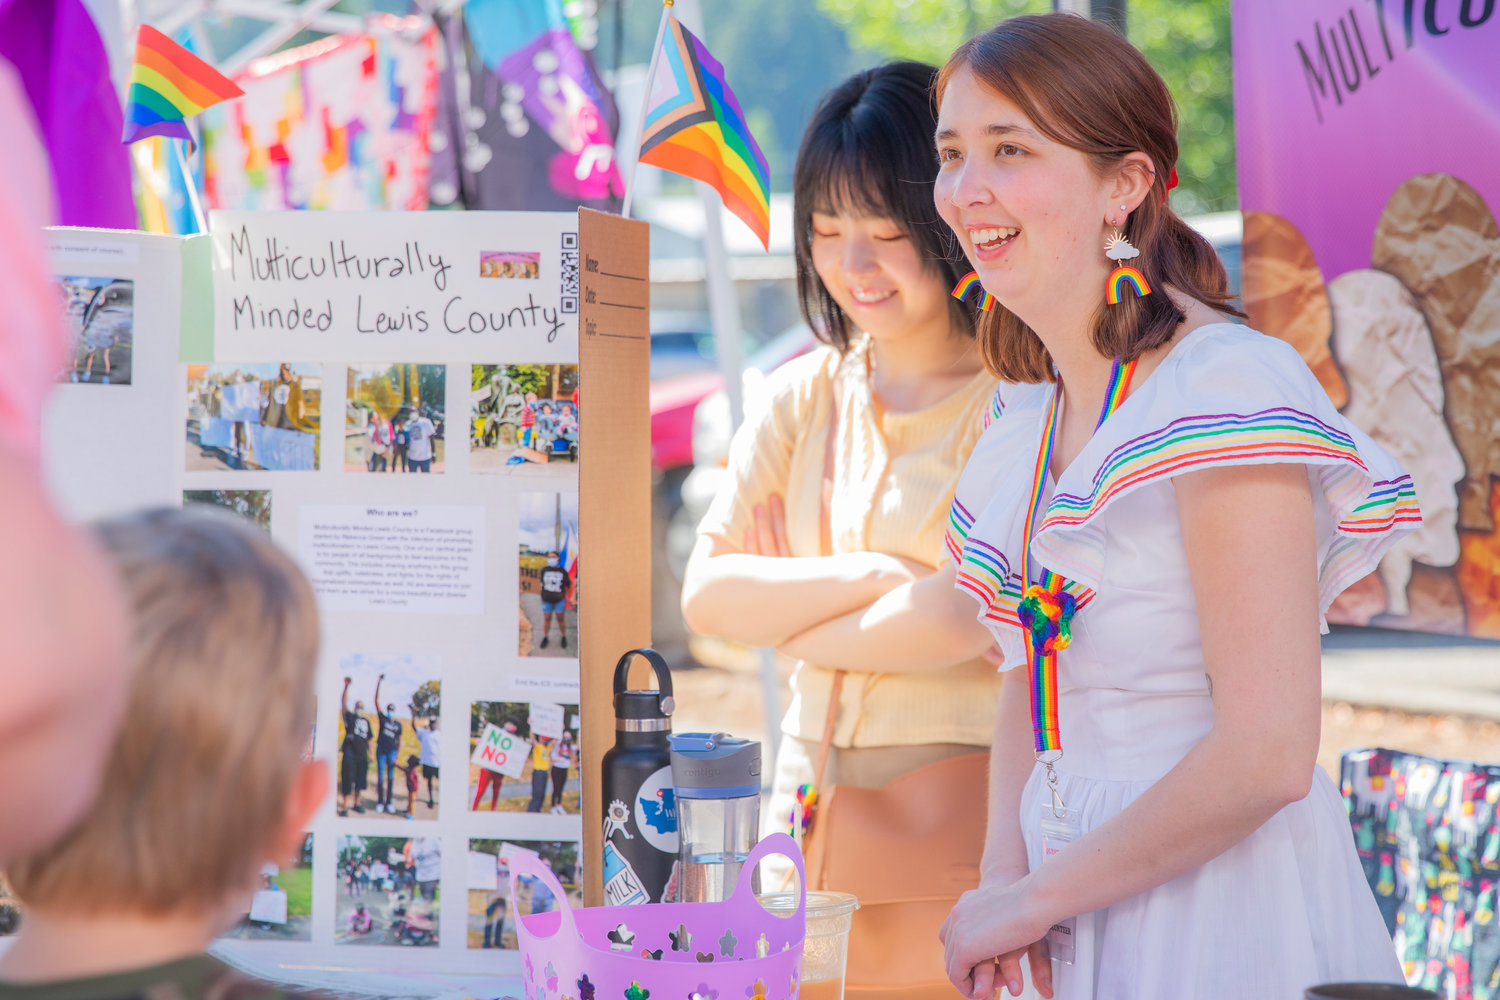 Lujan Rodriguez smiles and greets visitors at a Multiculturally Minded Lewis County booth during a pride event in downtown Centralia on Saturday.